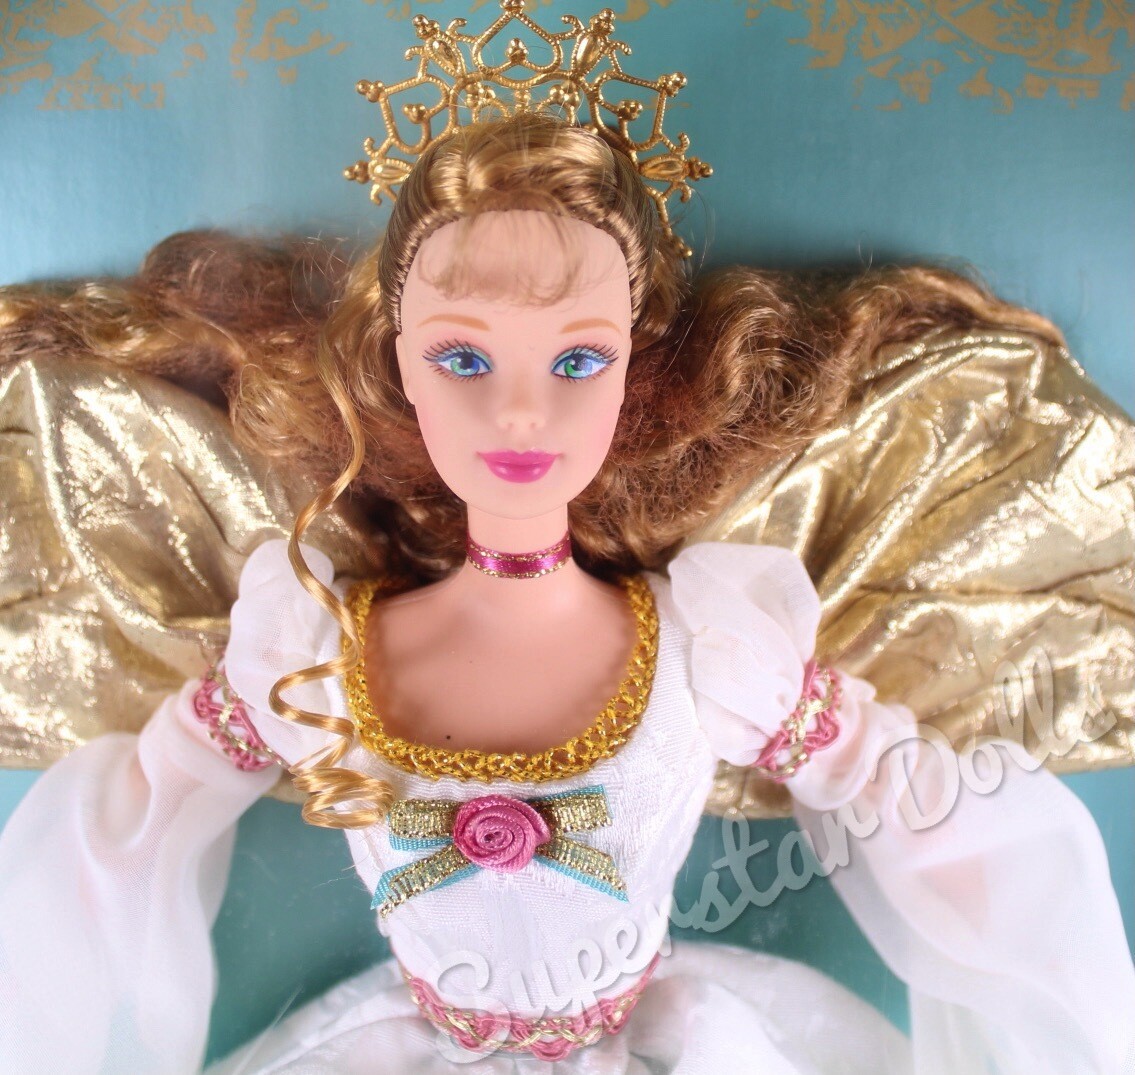 1998 Collector Edition: Angel of Joy Barbie Doll